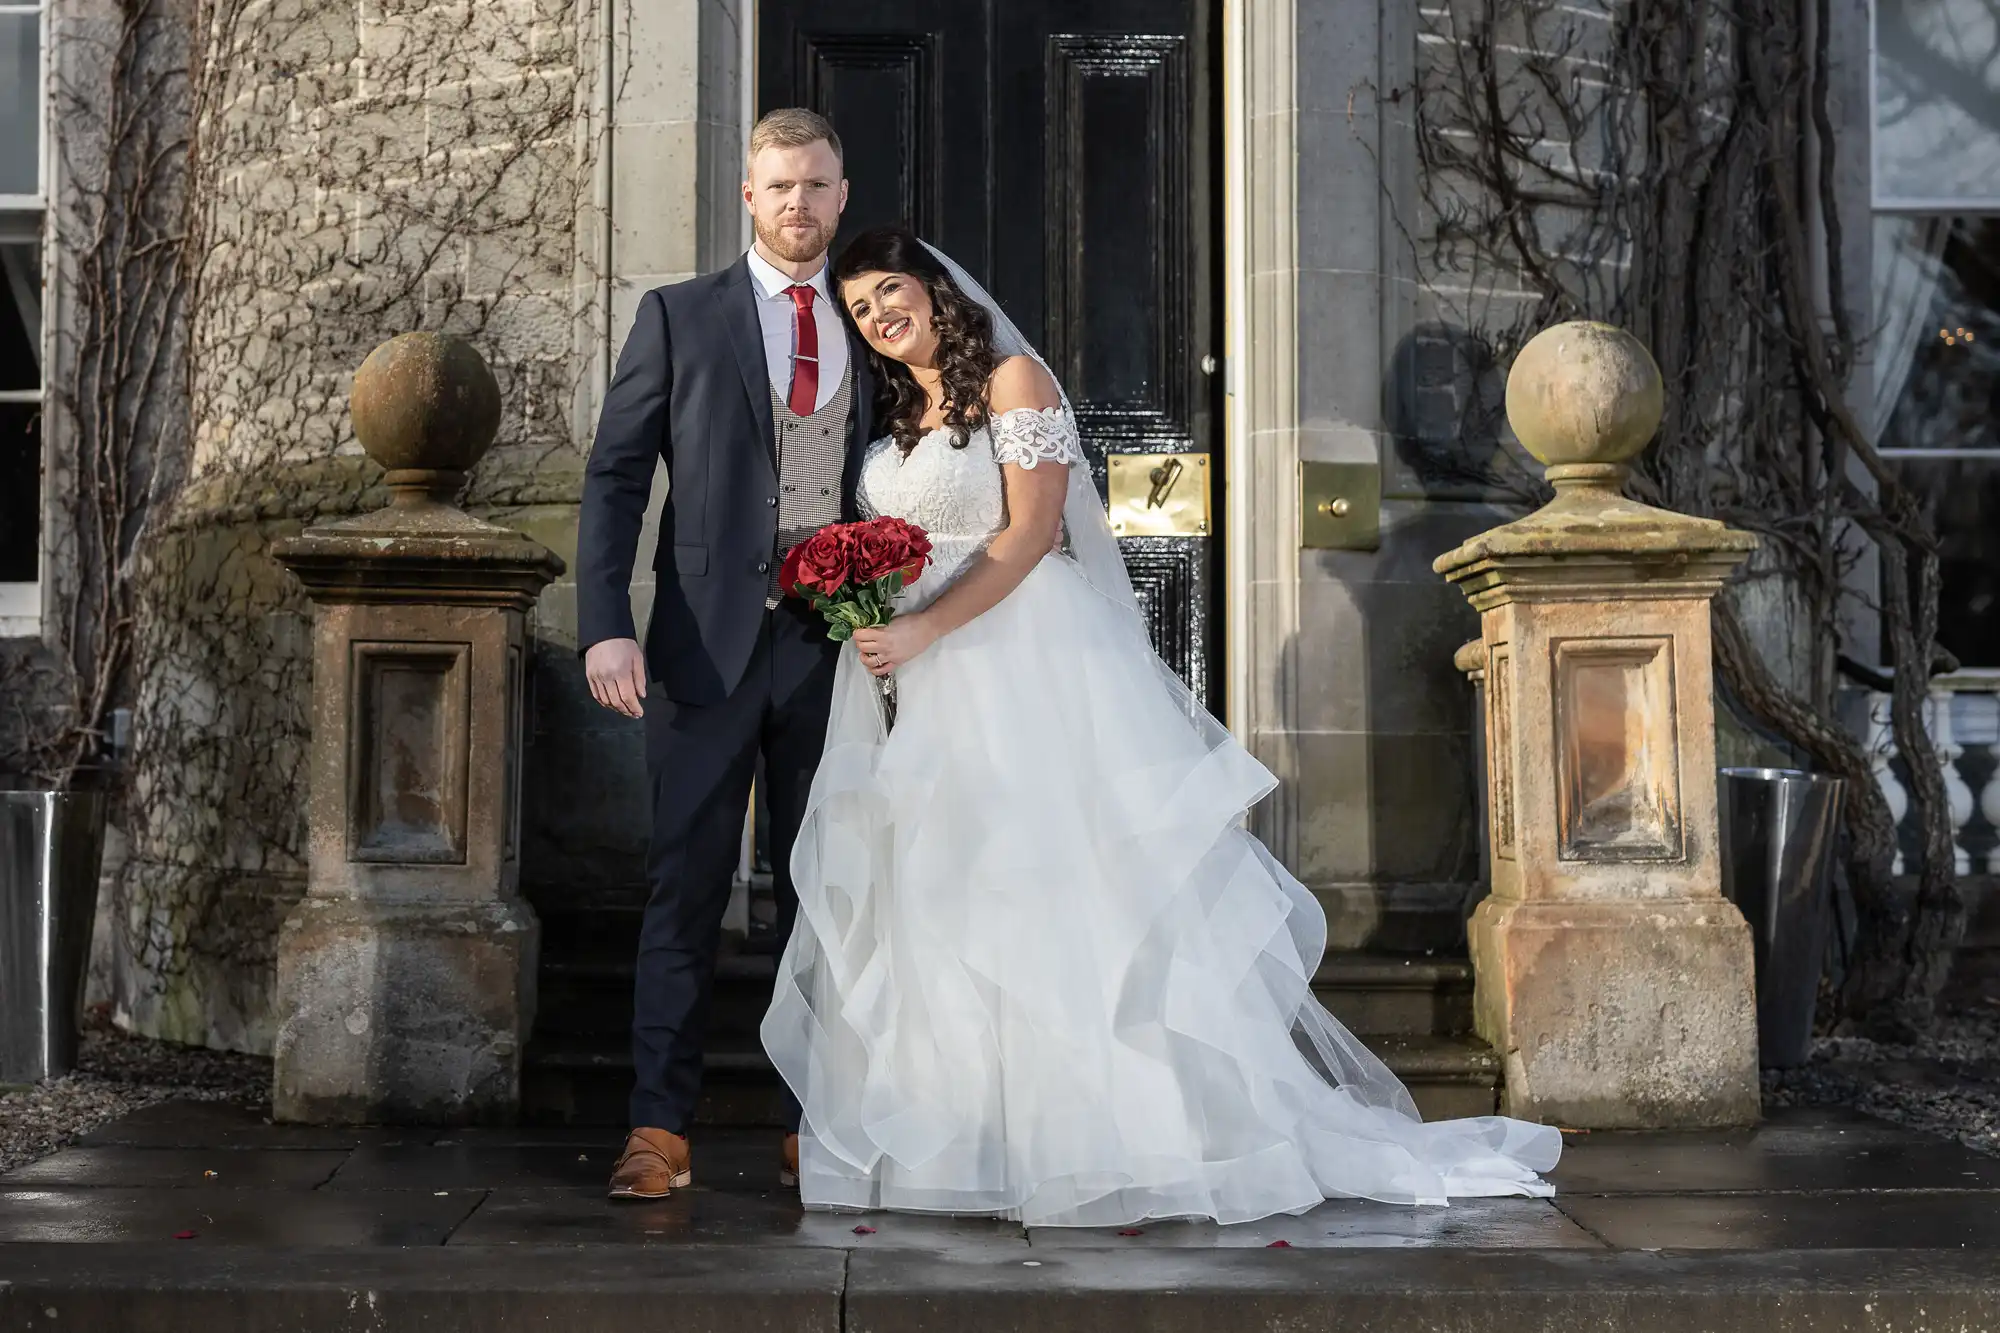 A bride in a white wedding dress holds red roses and stands next to a groom in a dark suit in front of a building entrance with ornate columns.